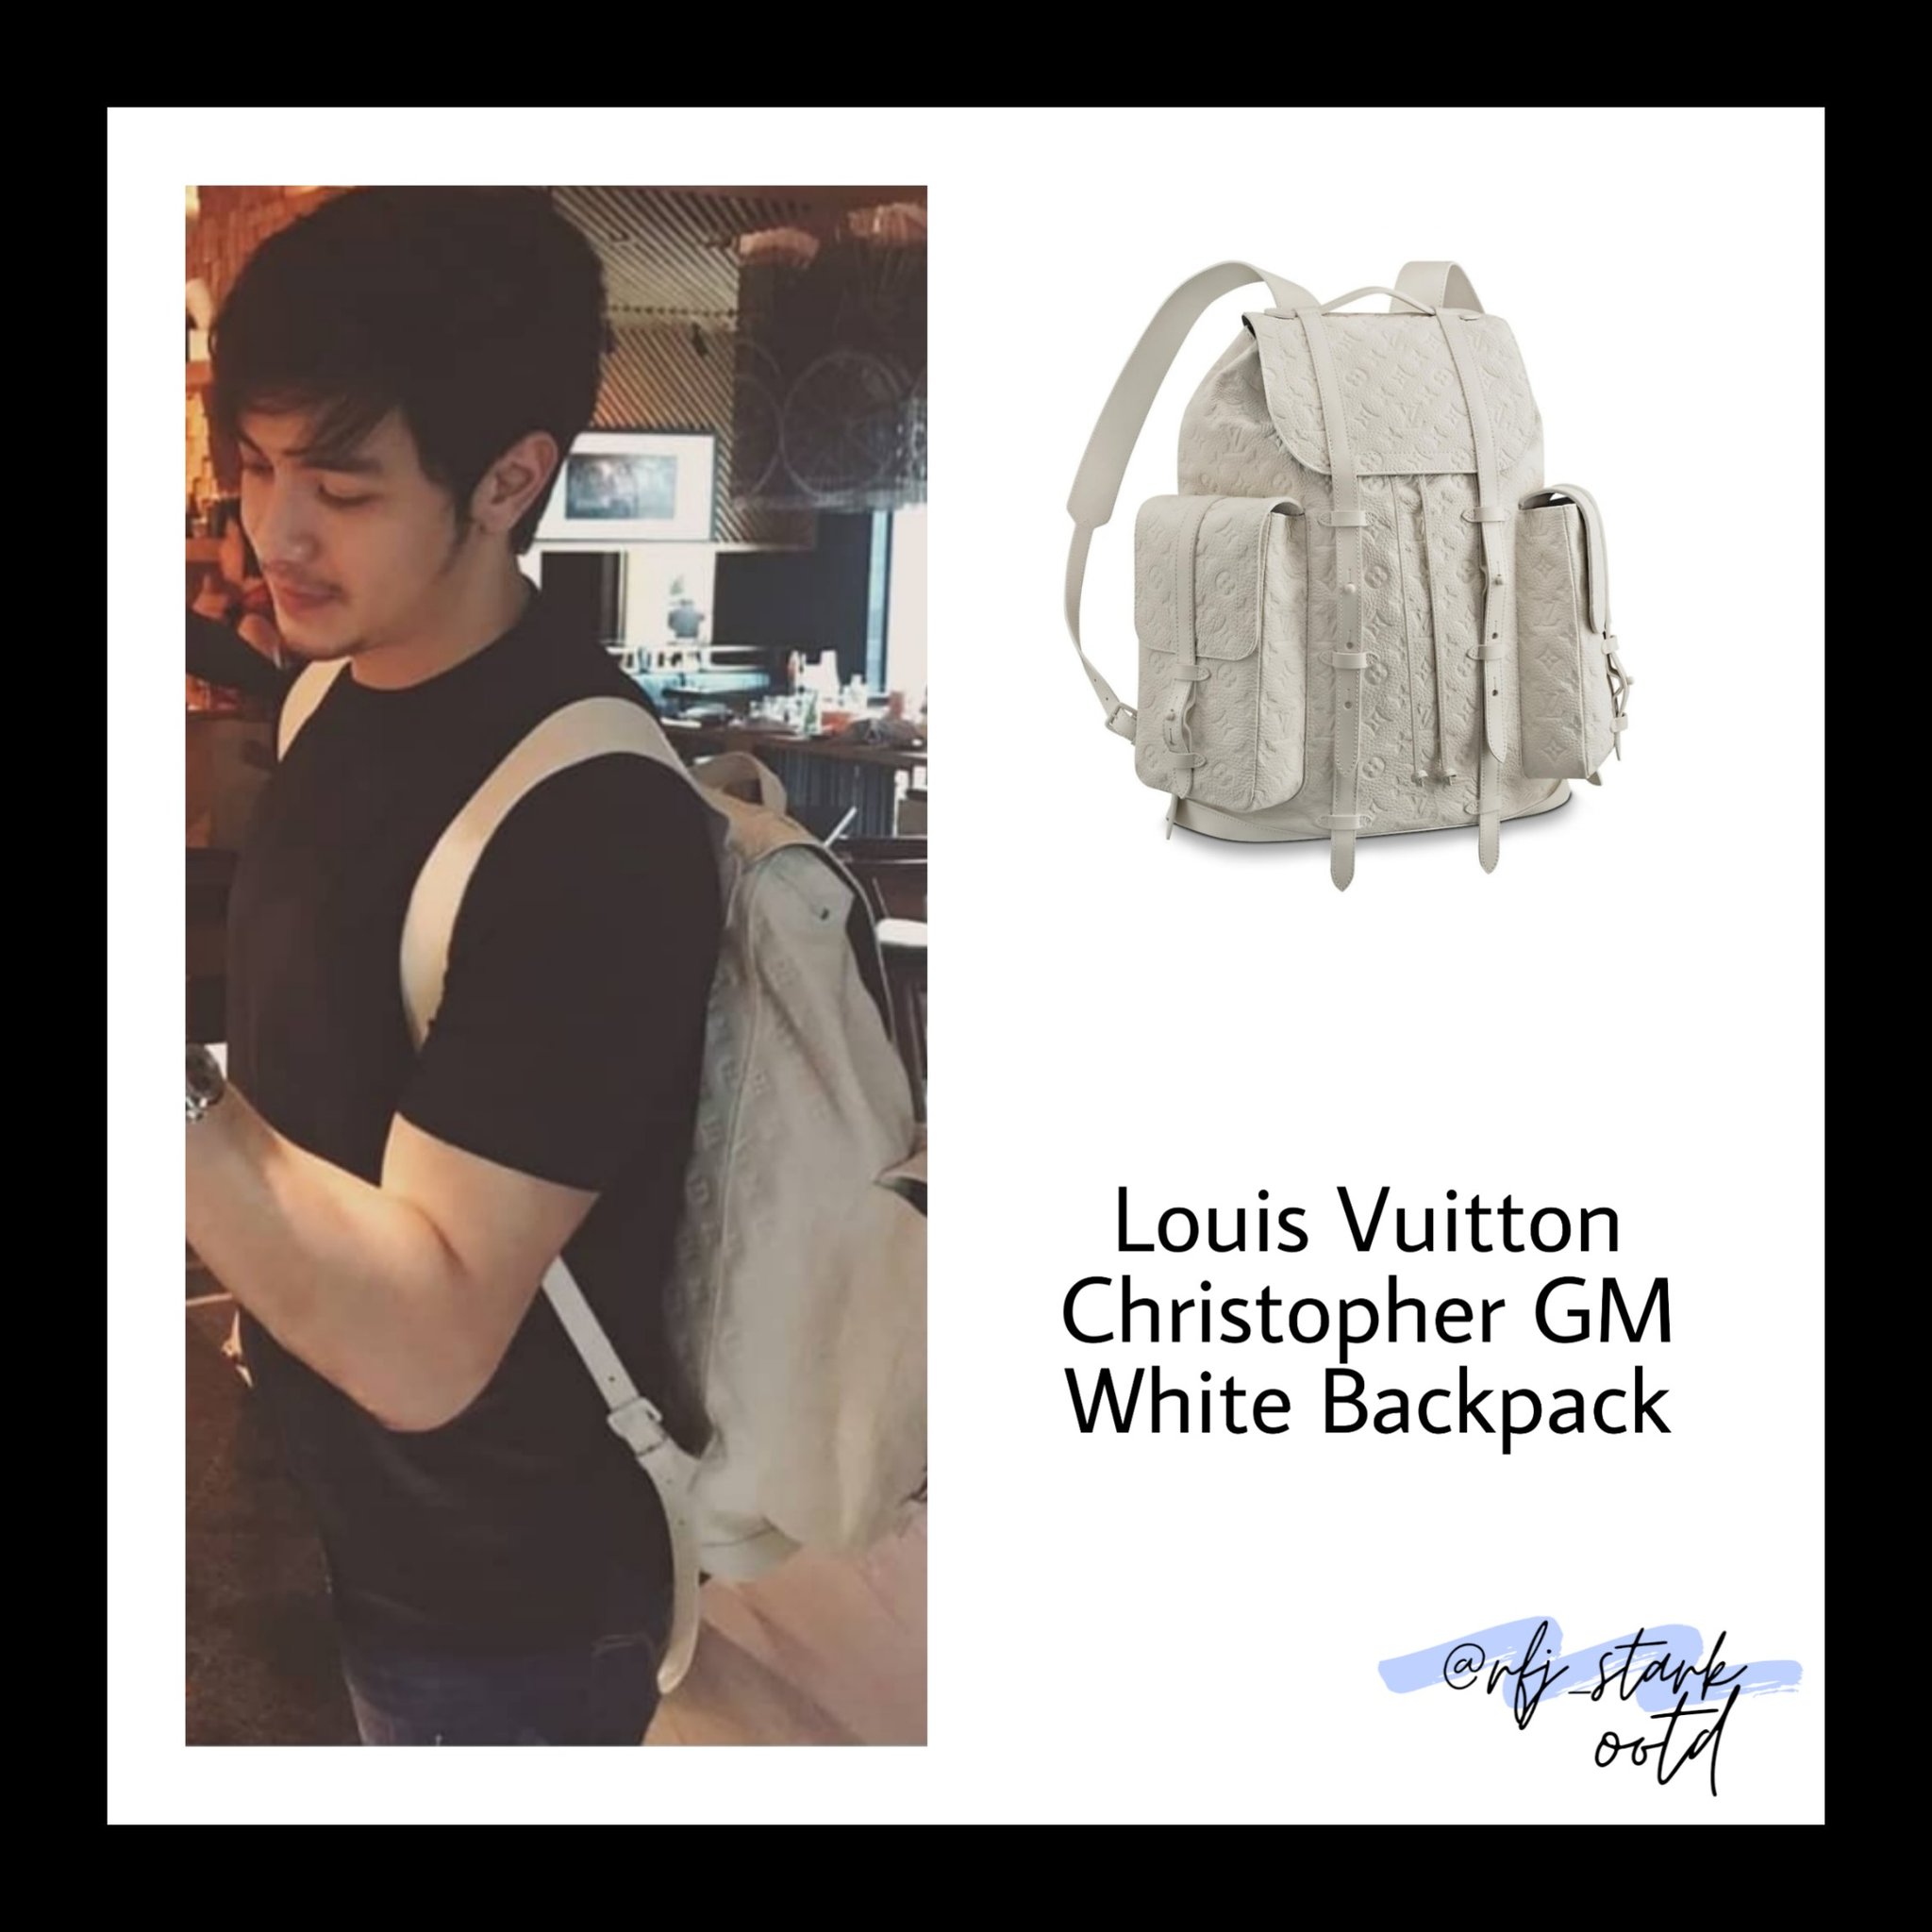 X 上的𝘀𝘁 ΛＲ𝗸 嵐💙◡̈🍓：「Louis Vuitton Christopher GM White Backpack Posted  on my IG @/rfj_ootd:  @aldenrichards02 OOTD  #AldenRichards #ALDENxNeozepGenSan  / 